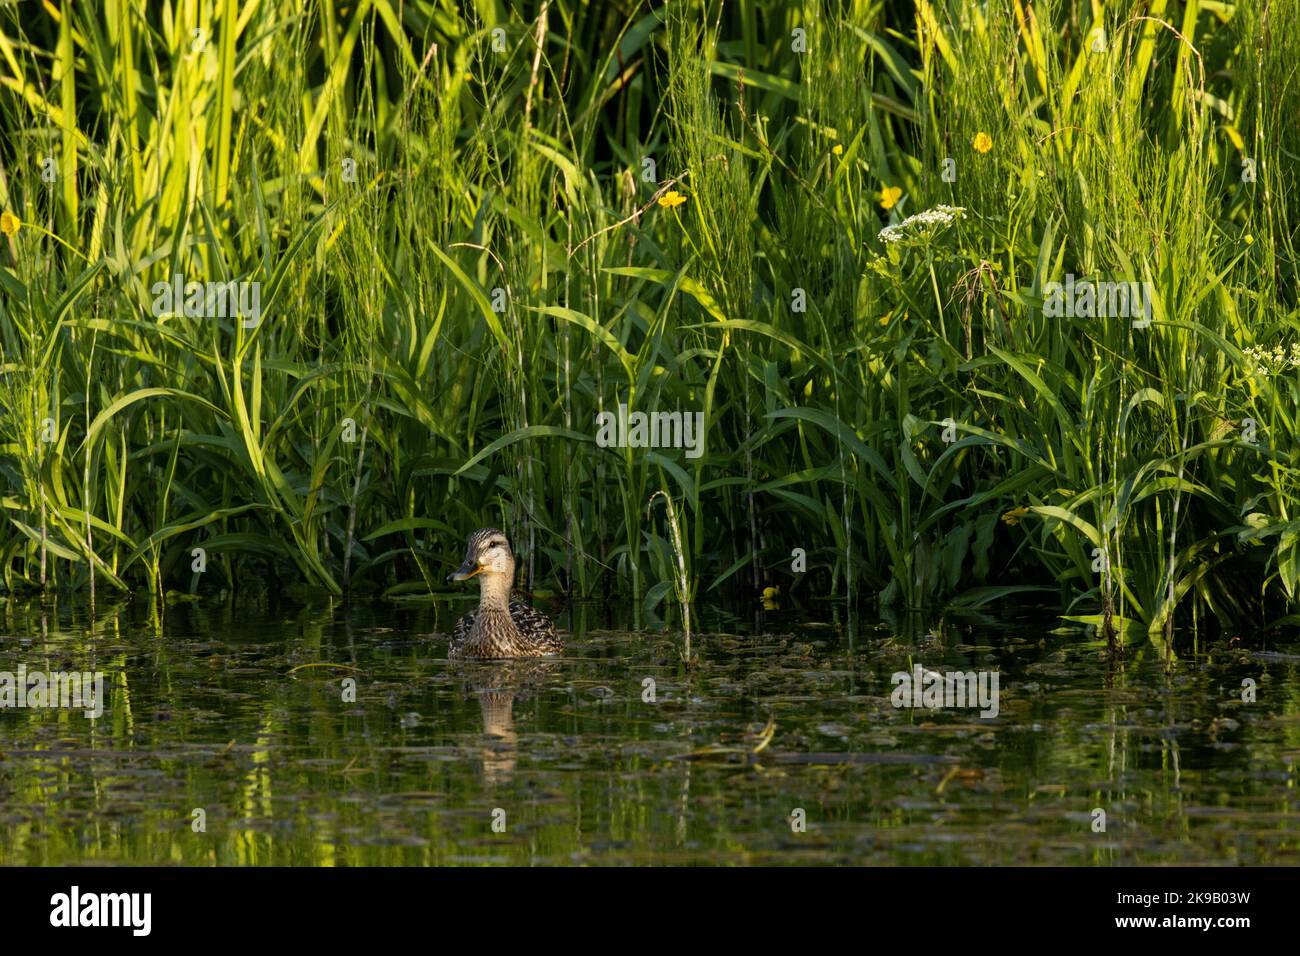 A female Mallard, Anas platyrhynchos swimming on a small river surrounded by lush vegetation. Shot in Estonia, Northern Europe. Stock Photo